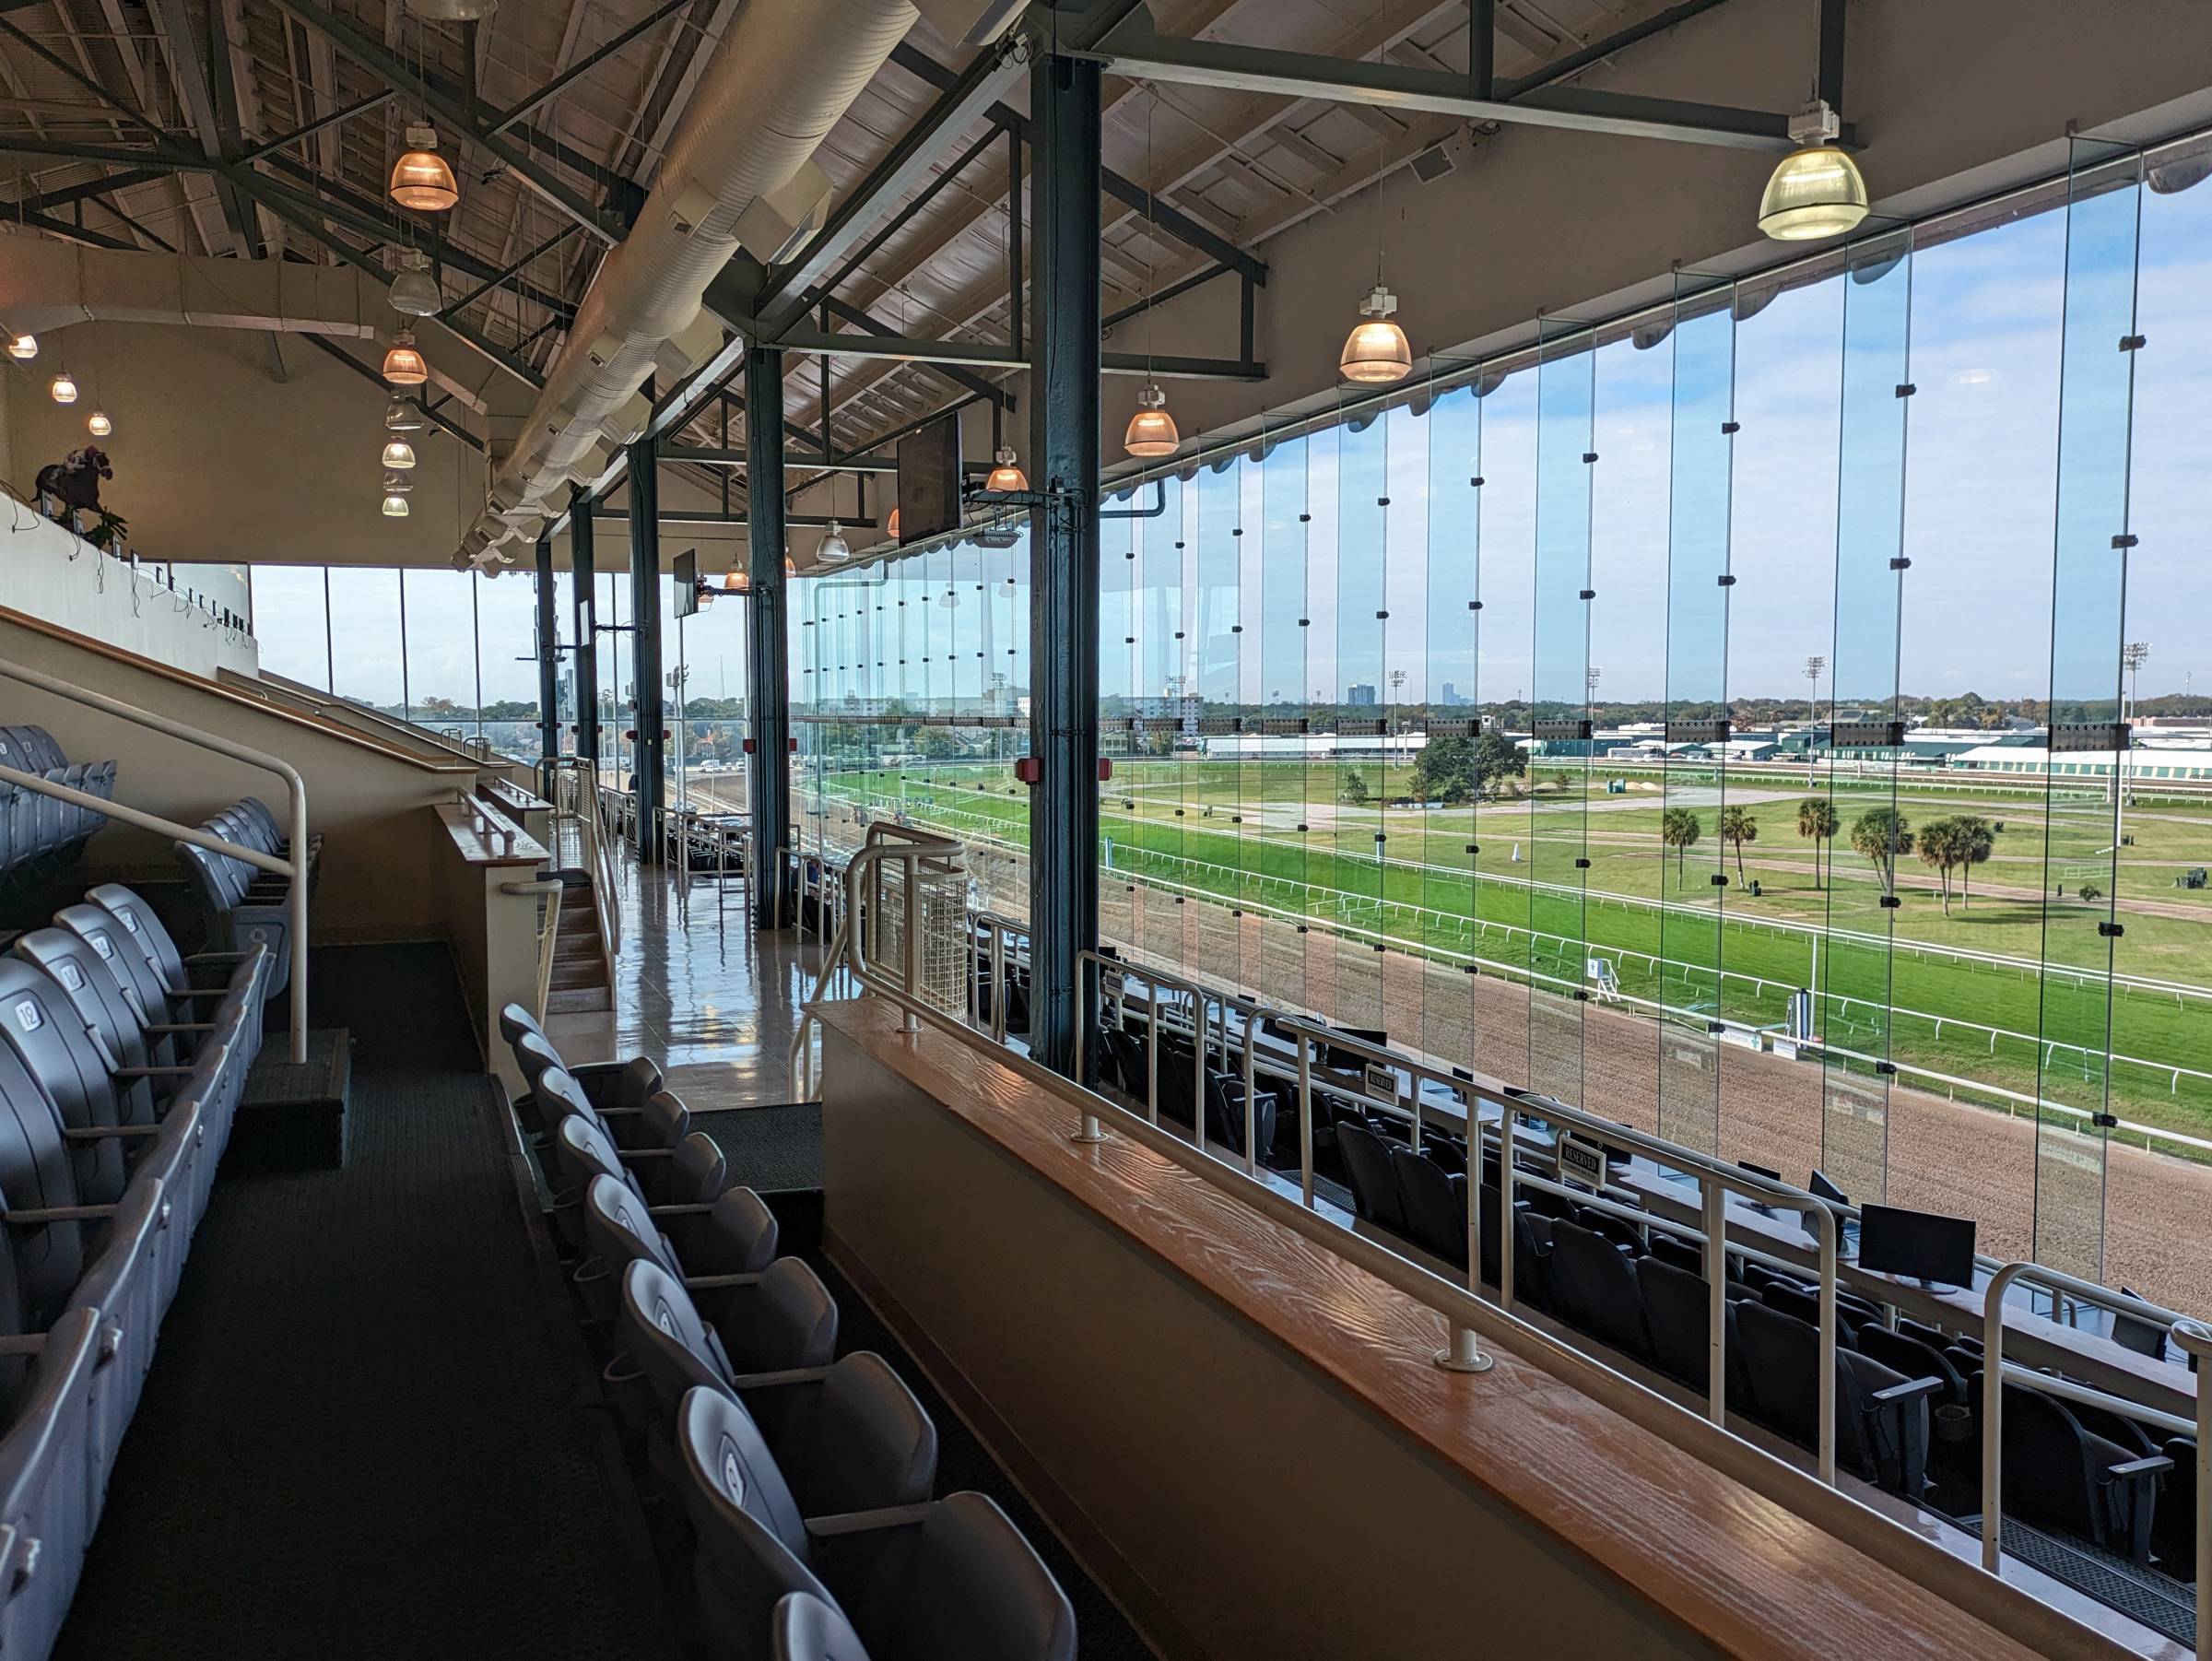 Clubhouse Seating at the Fair Grounds Race Course in New Orleans